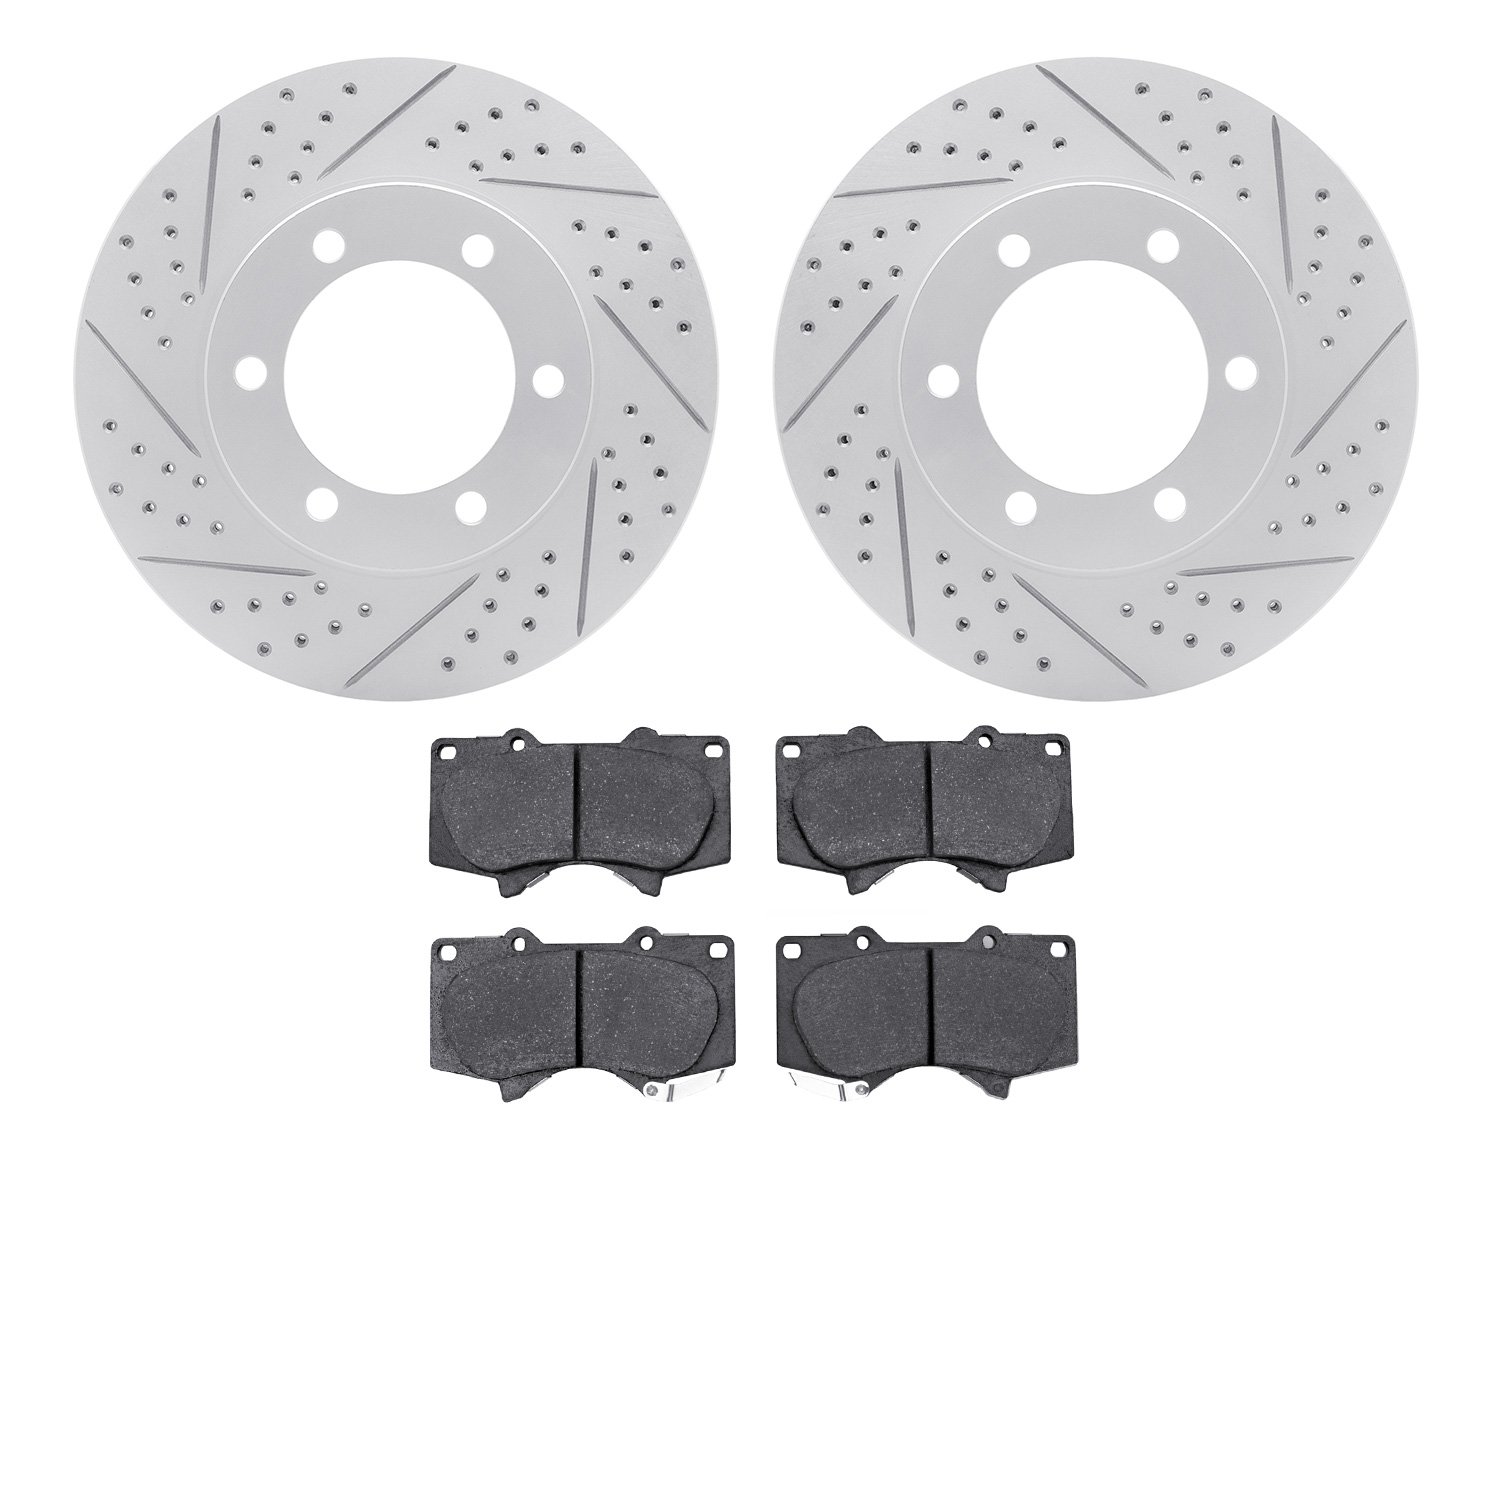 2402-76008 Geoperformance Drilled/Slotted Brake Rotors with Ultimate-Duty Brake Pads Kit, 2000-2007 Lexus/Toyota/Scion, Position